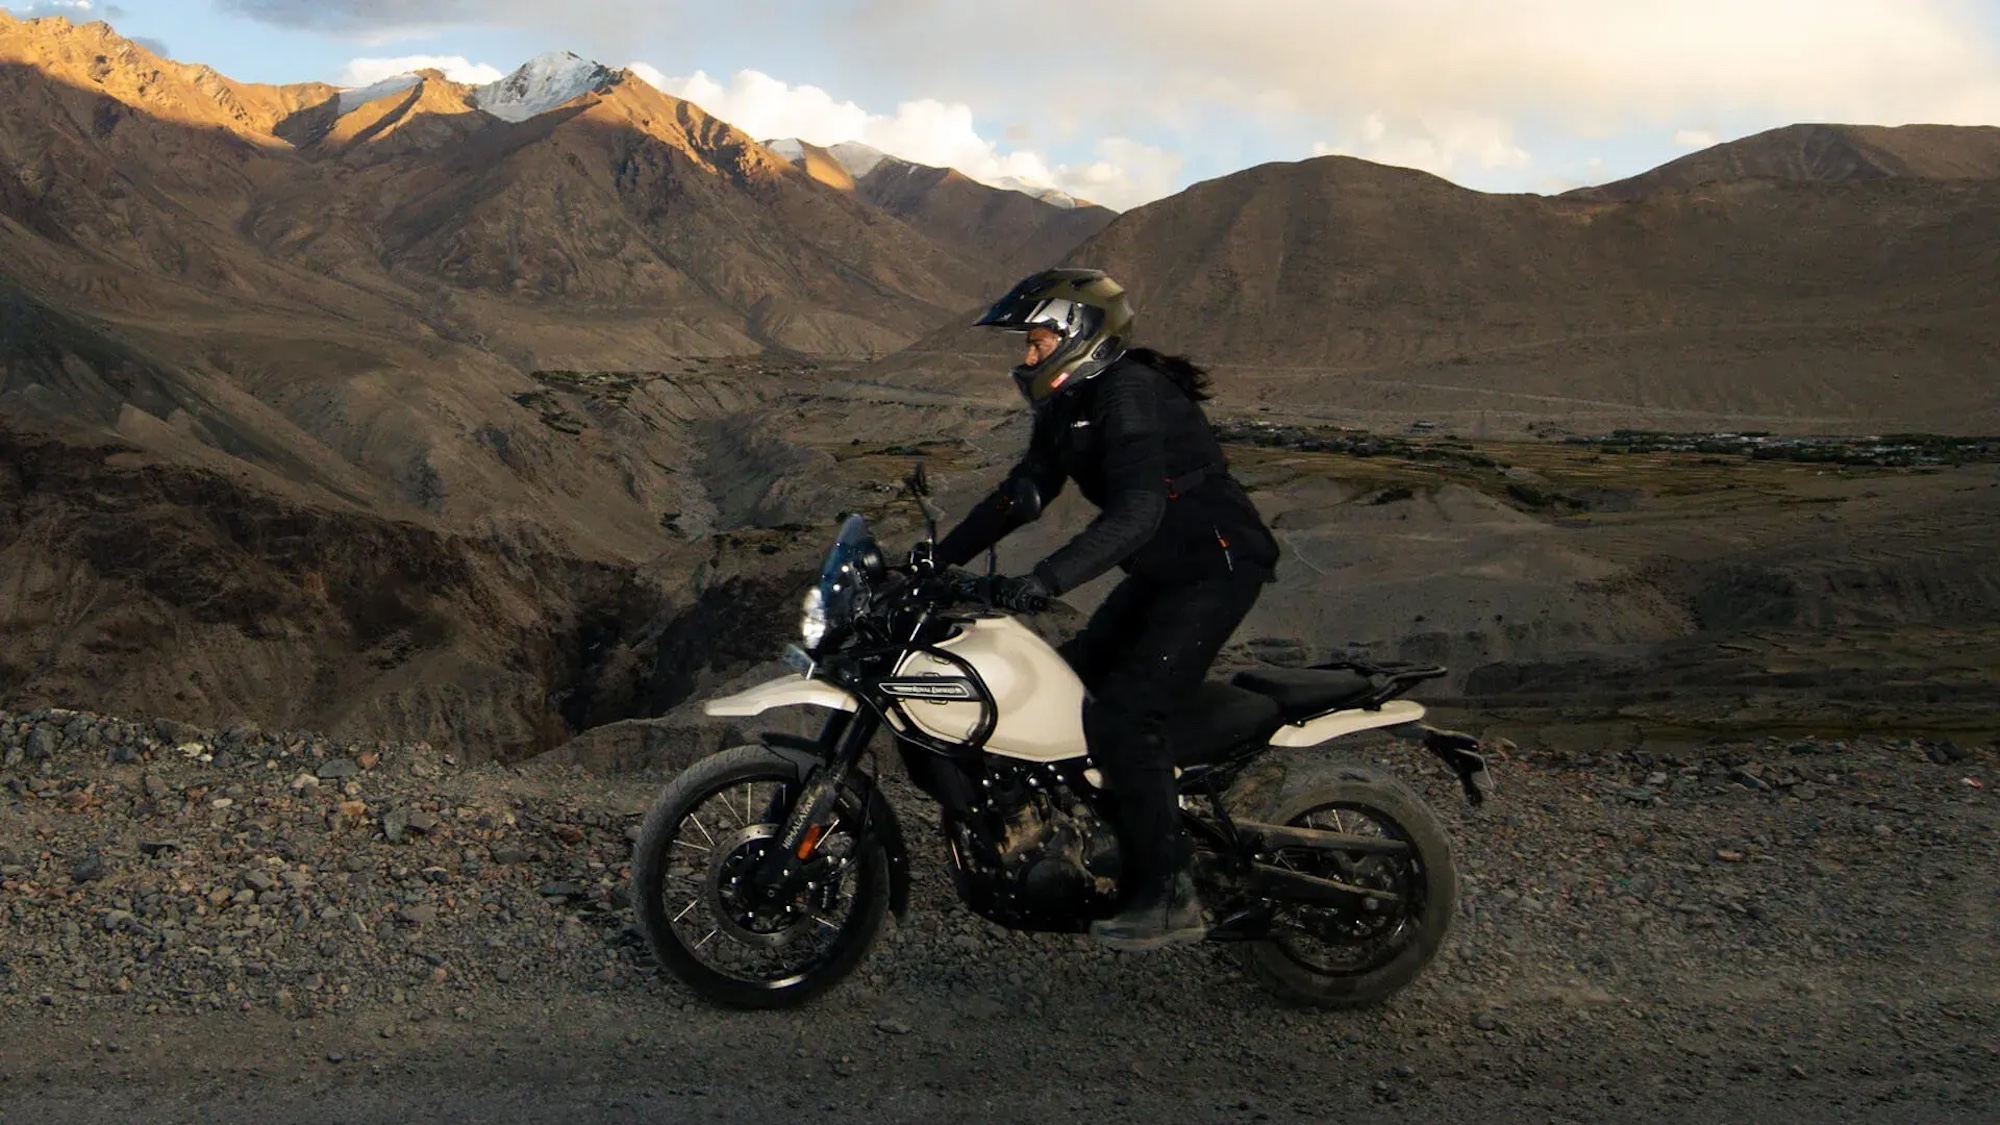 A rider on an adventure motorcycle.